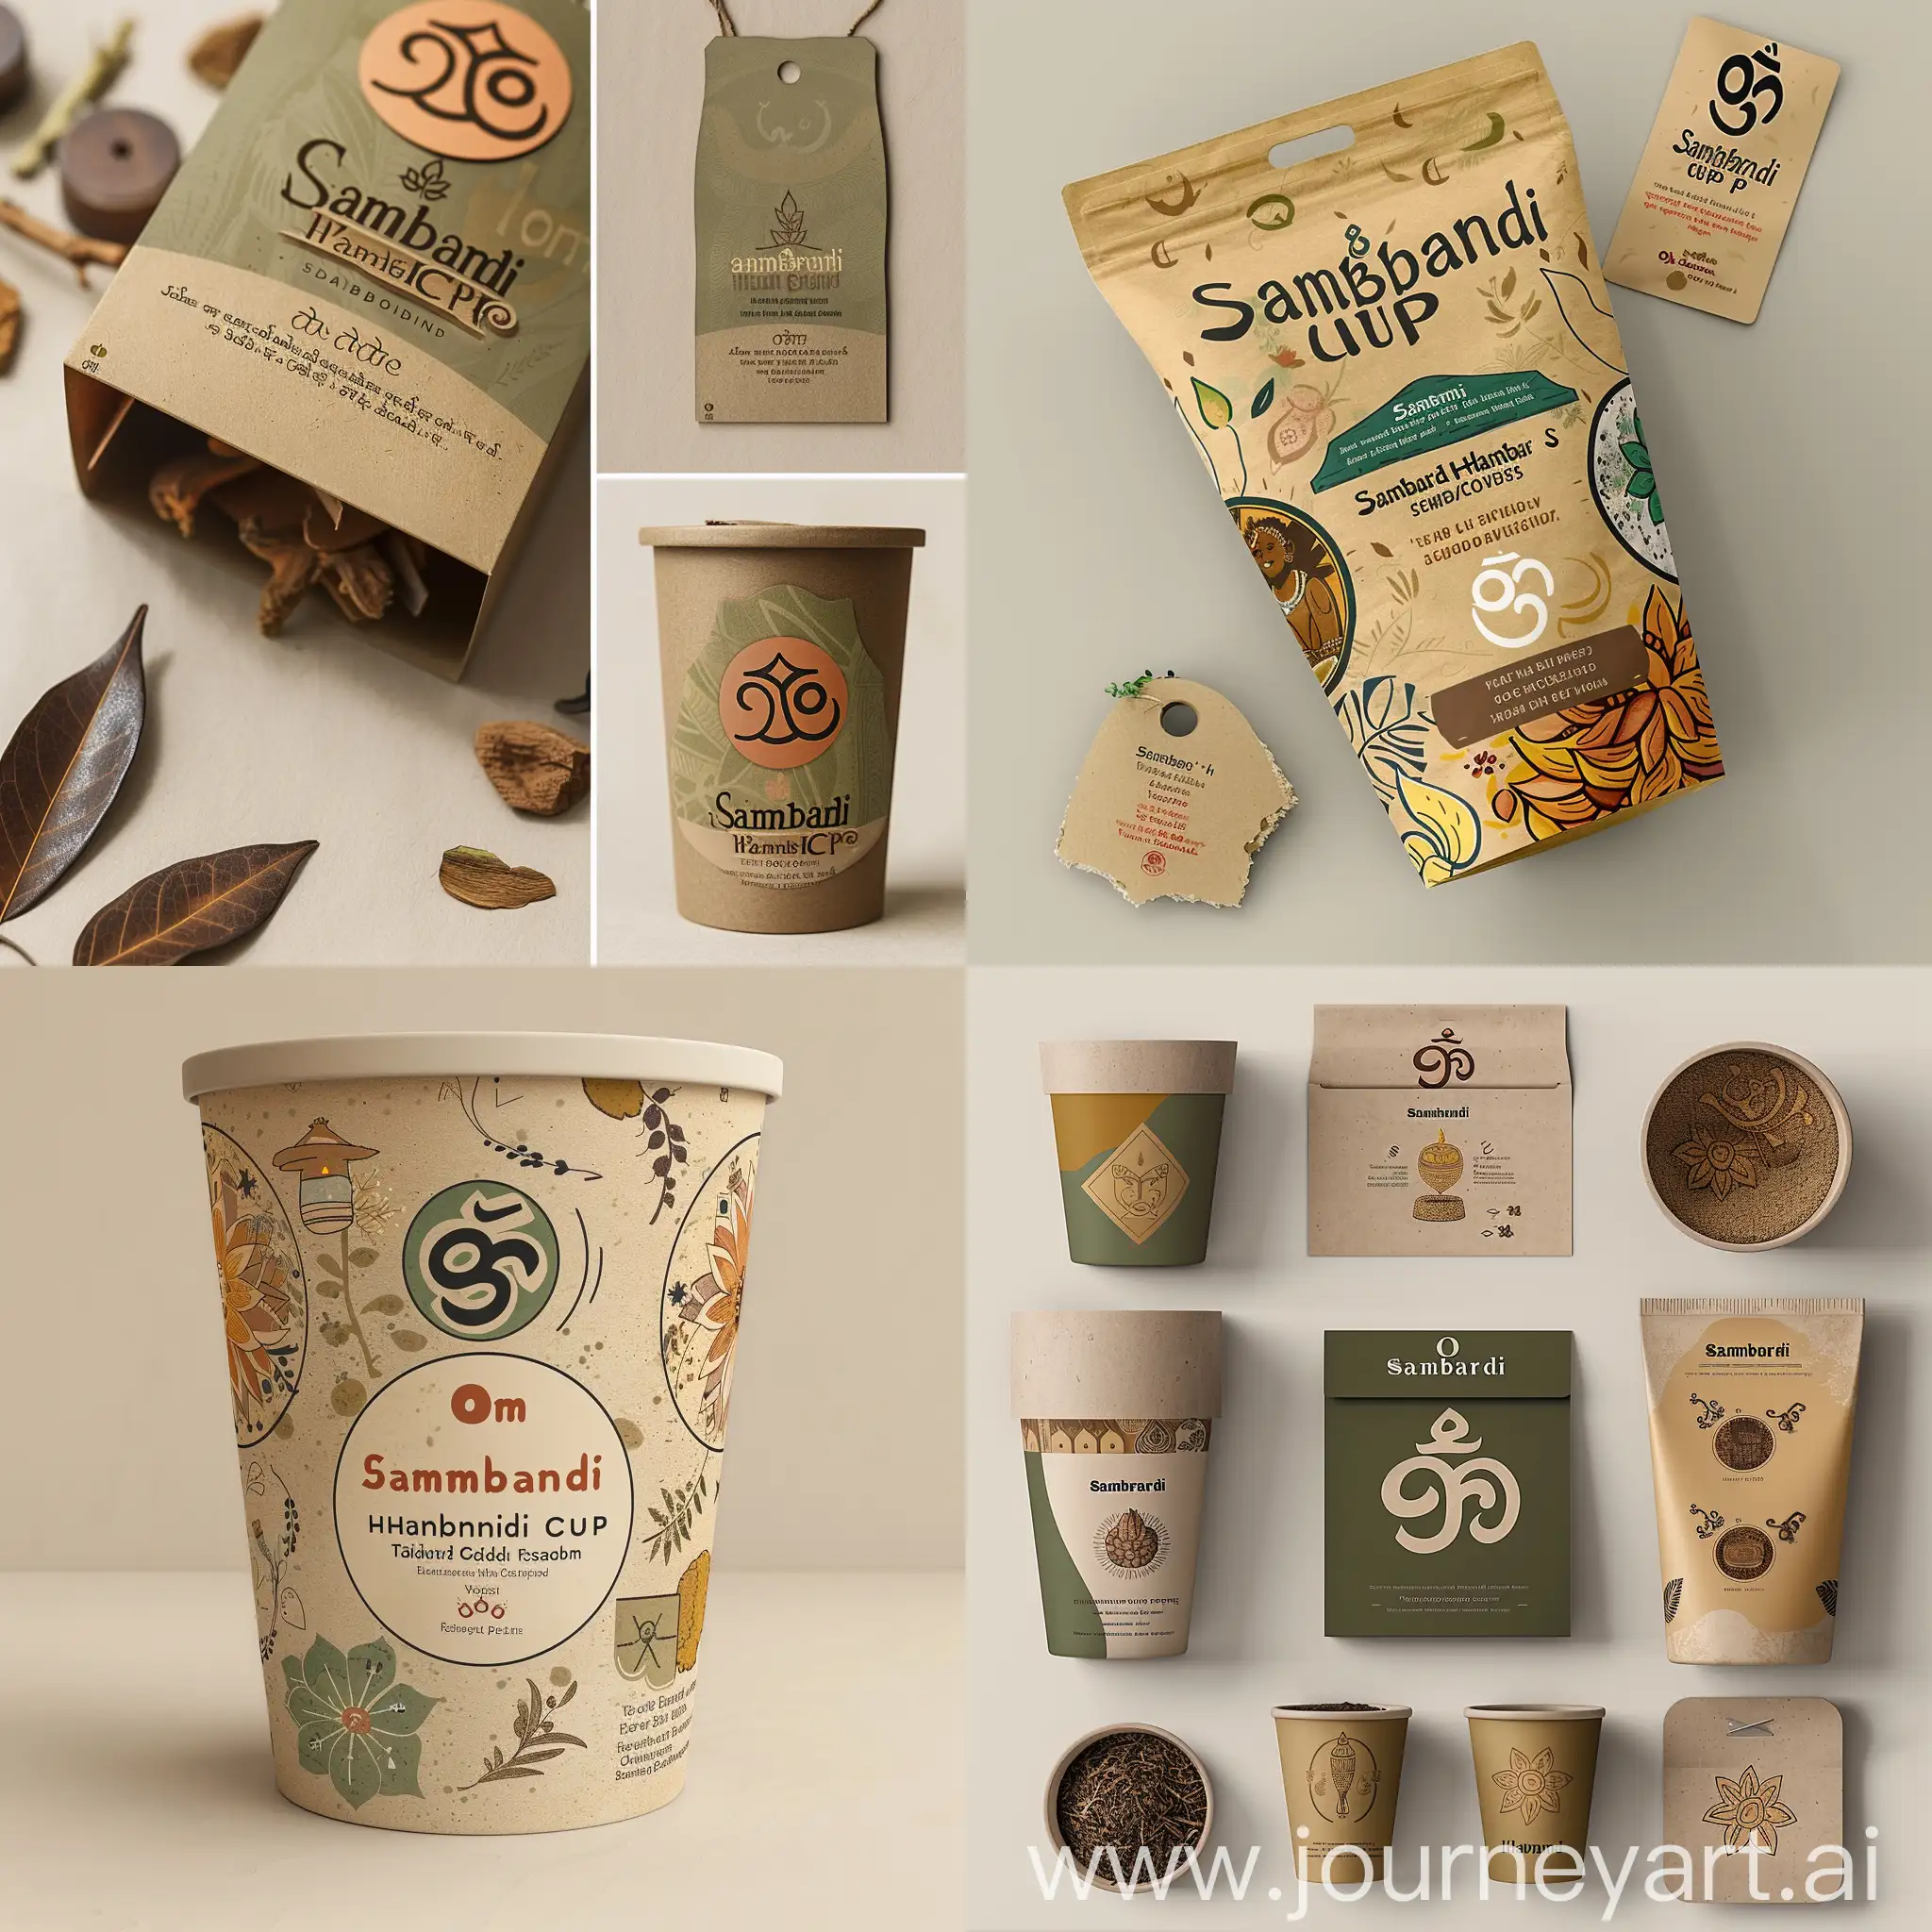 "Create an image of an eco-friendly packaging design for Sambrani Havan Cups. The packaging should be made of sustainable materials like kraft paper or recycled paper. It should feature earthy color tones such as browns and greens, and include traditional or spiritual symbols like the 'Om' sign or a lotus. The design should subtly showcase the ingredients like cow dung, sandalwood, and herbs through pictograms or icons. Incorporate an element that allows the aroma to be sampled without opening the package. Add a handmade touch, like a small tag or a note about the artisans, and ensure the overall look is elegant yet simple, evoking a sense of peace and simplicity. The background should be neutral to emphasize the packaging design."